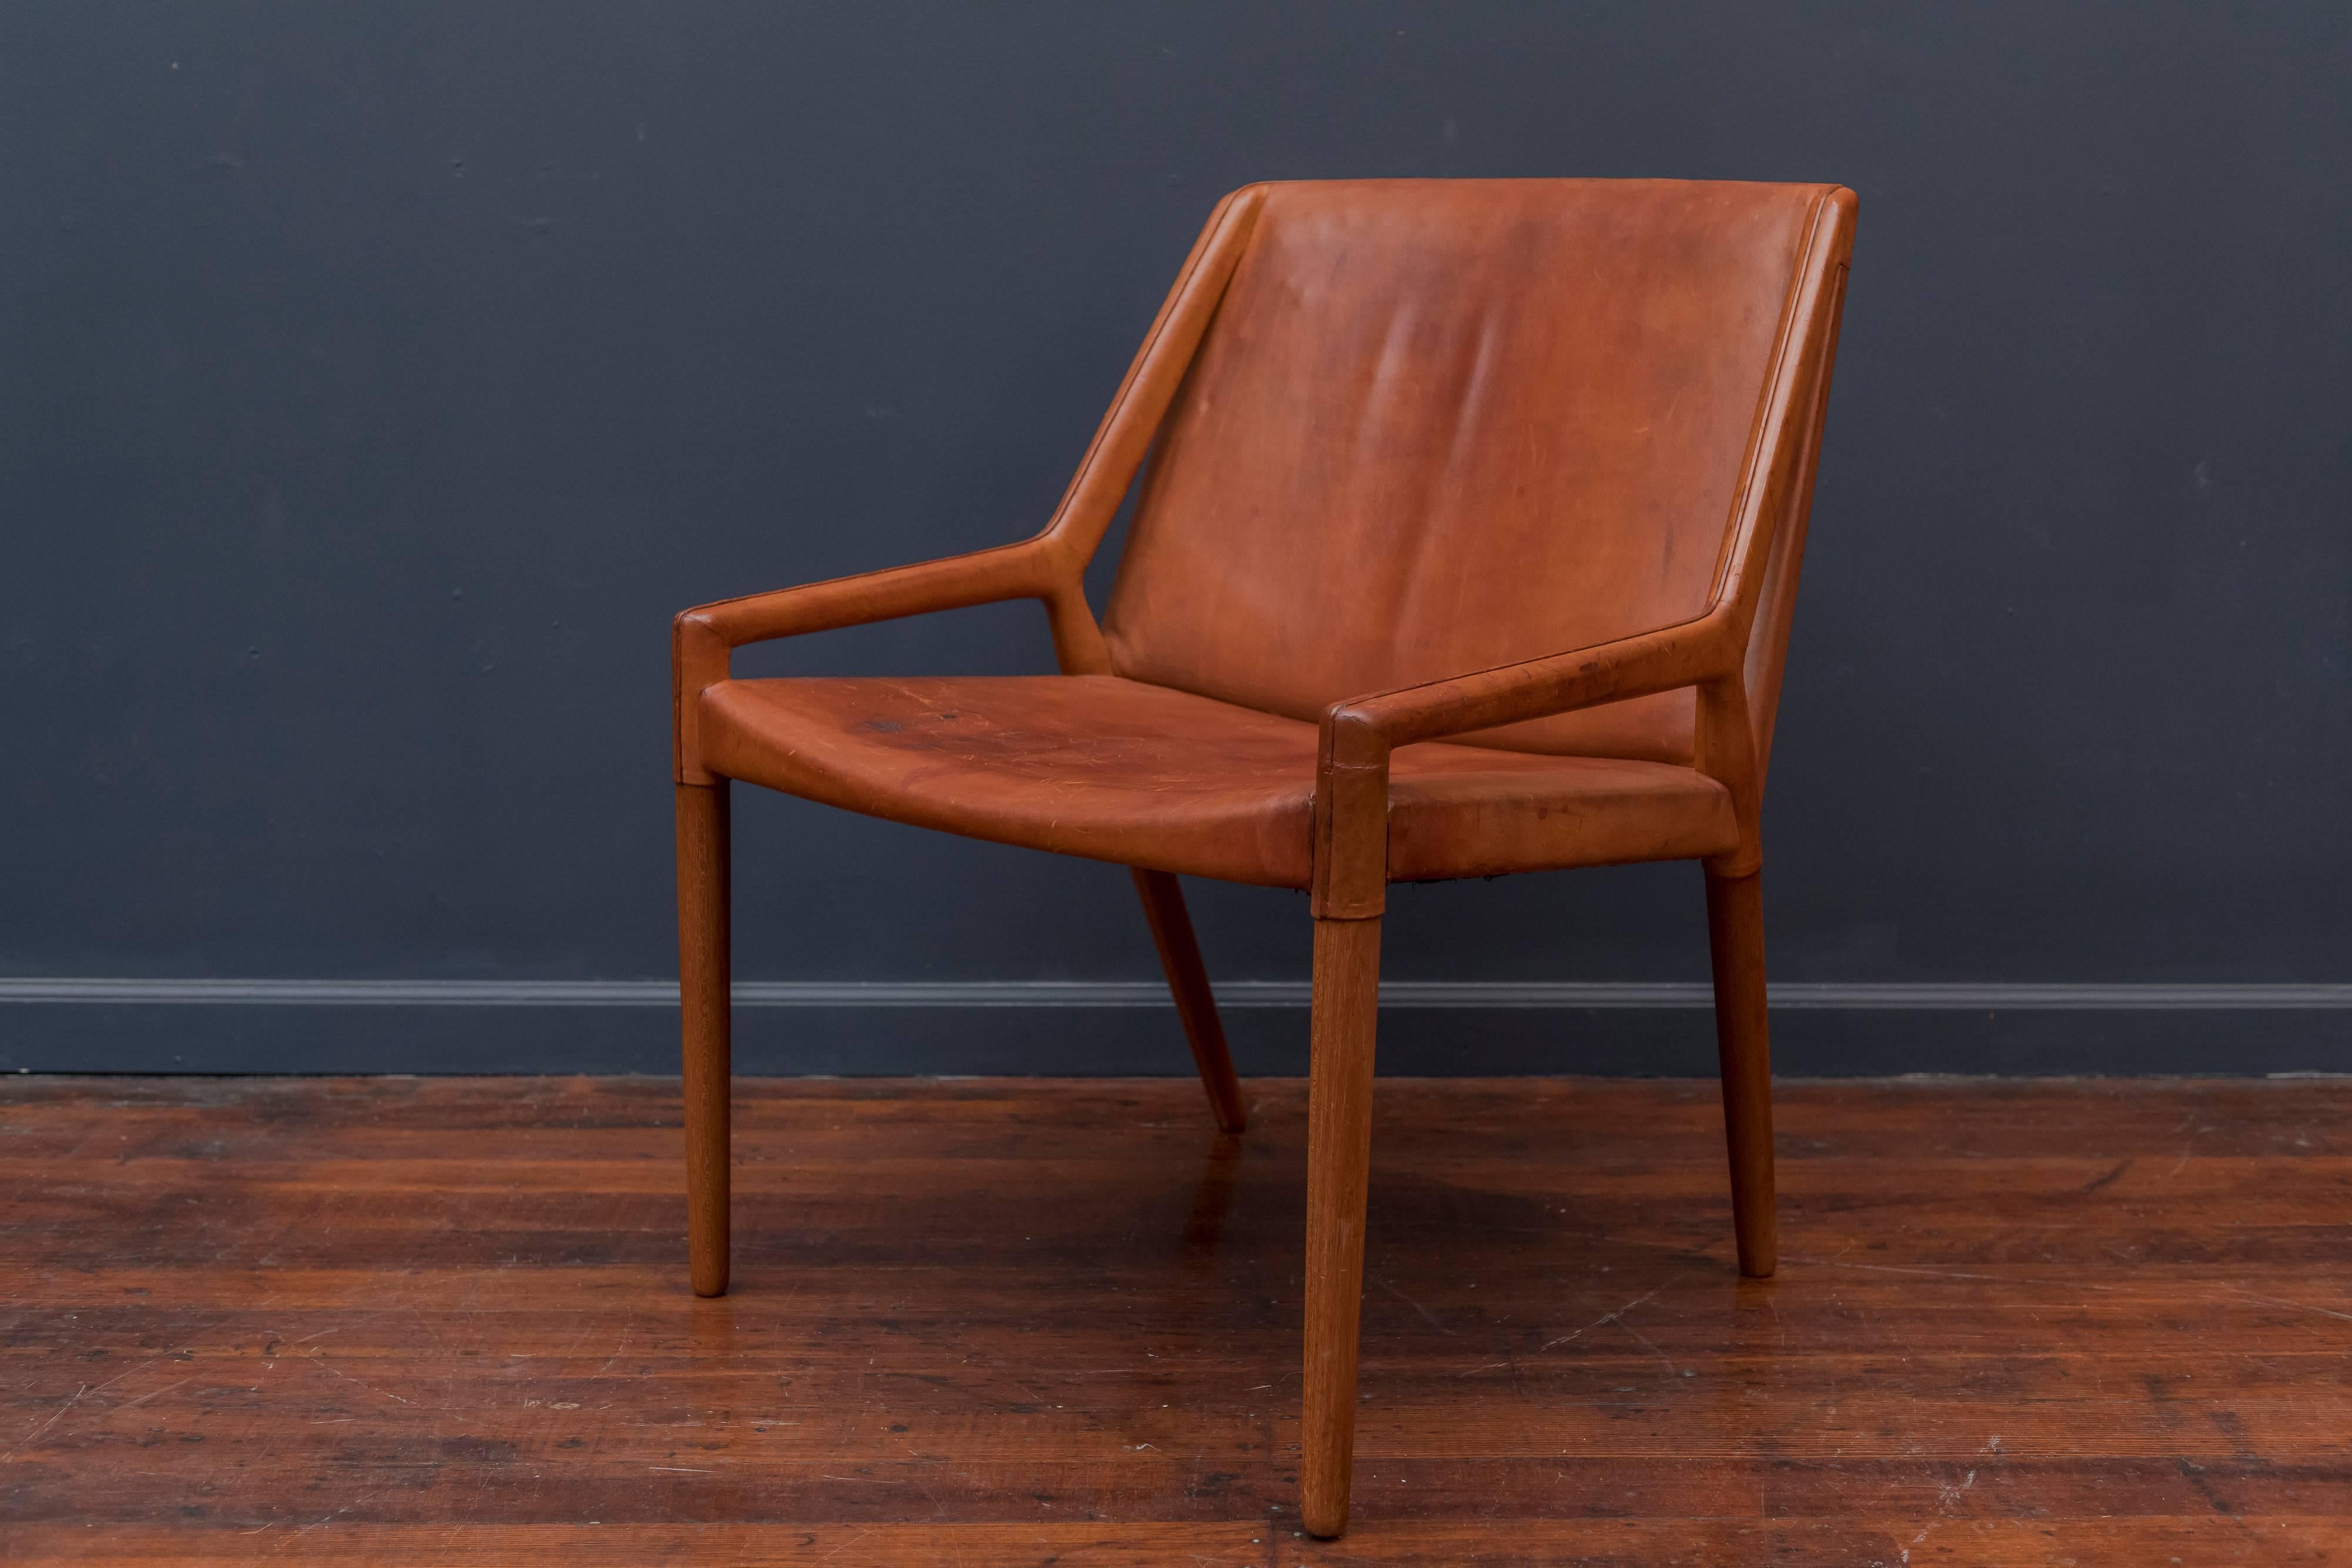 Sophisticated design cognac leather teak lounge chair by Eijner Larsen & Askel Bender Madsen for Willy Beck, Denmark. Good original condition with age appropriate wear and use.